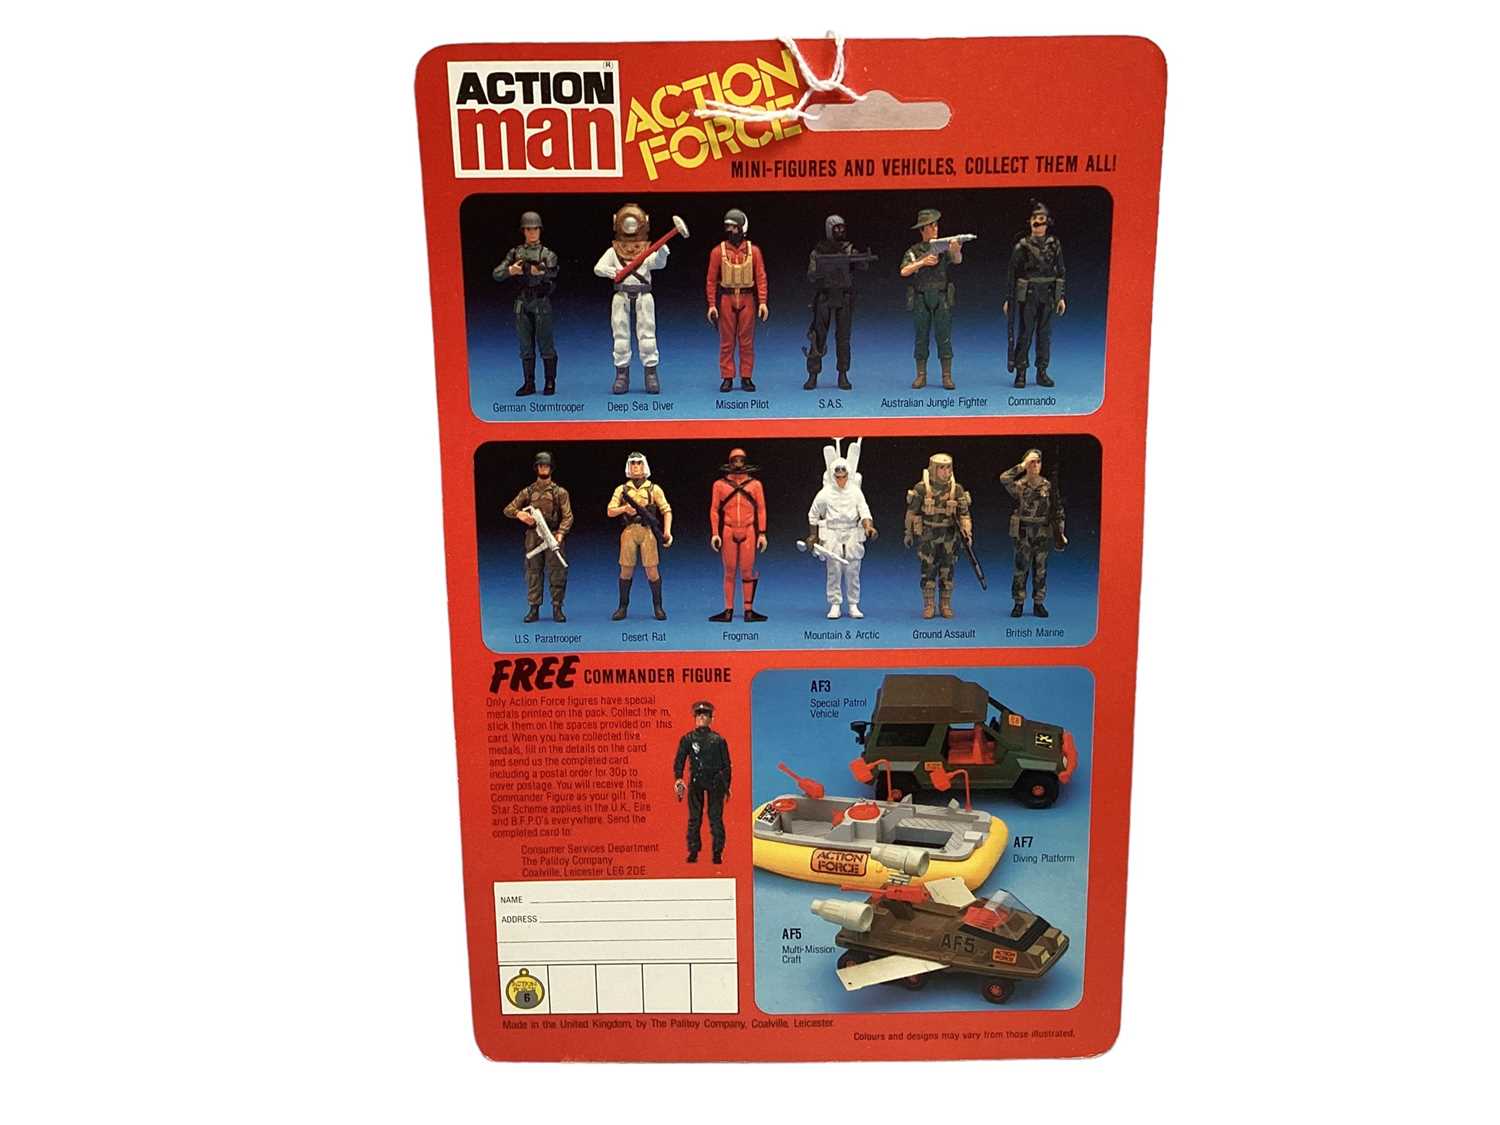 Palitoy Action Man Action Force Series 1 S.A.S, on card with blister pack (1) - Image 3 of 3